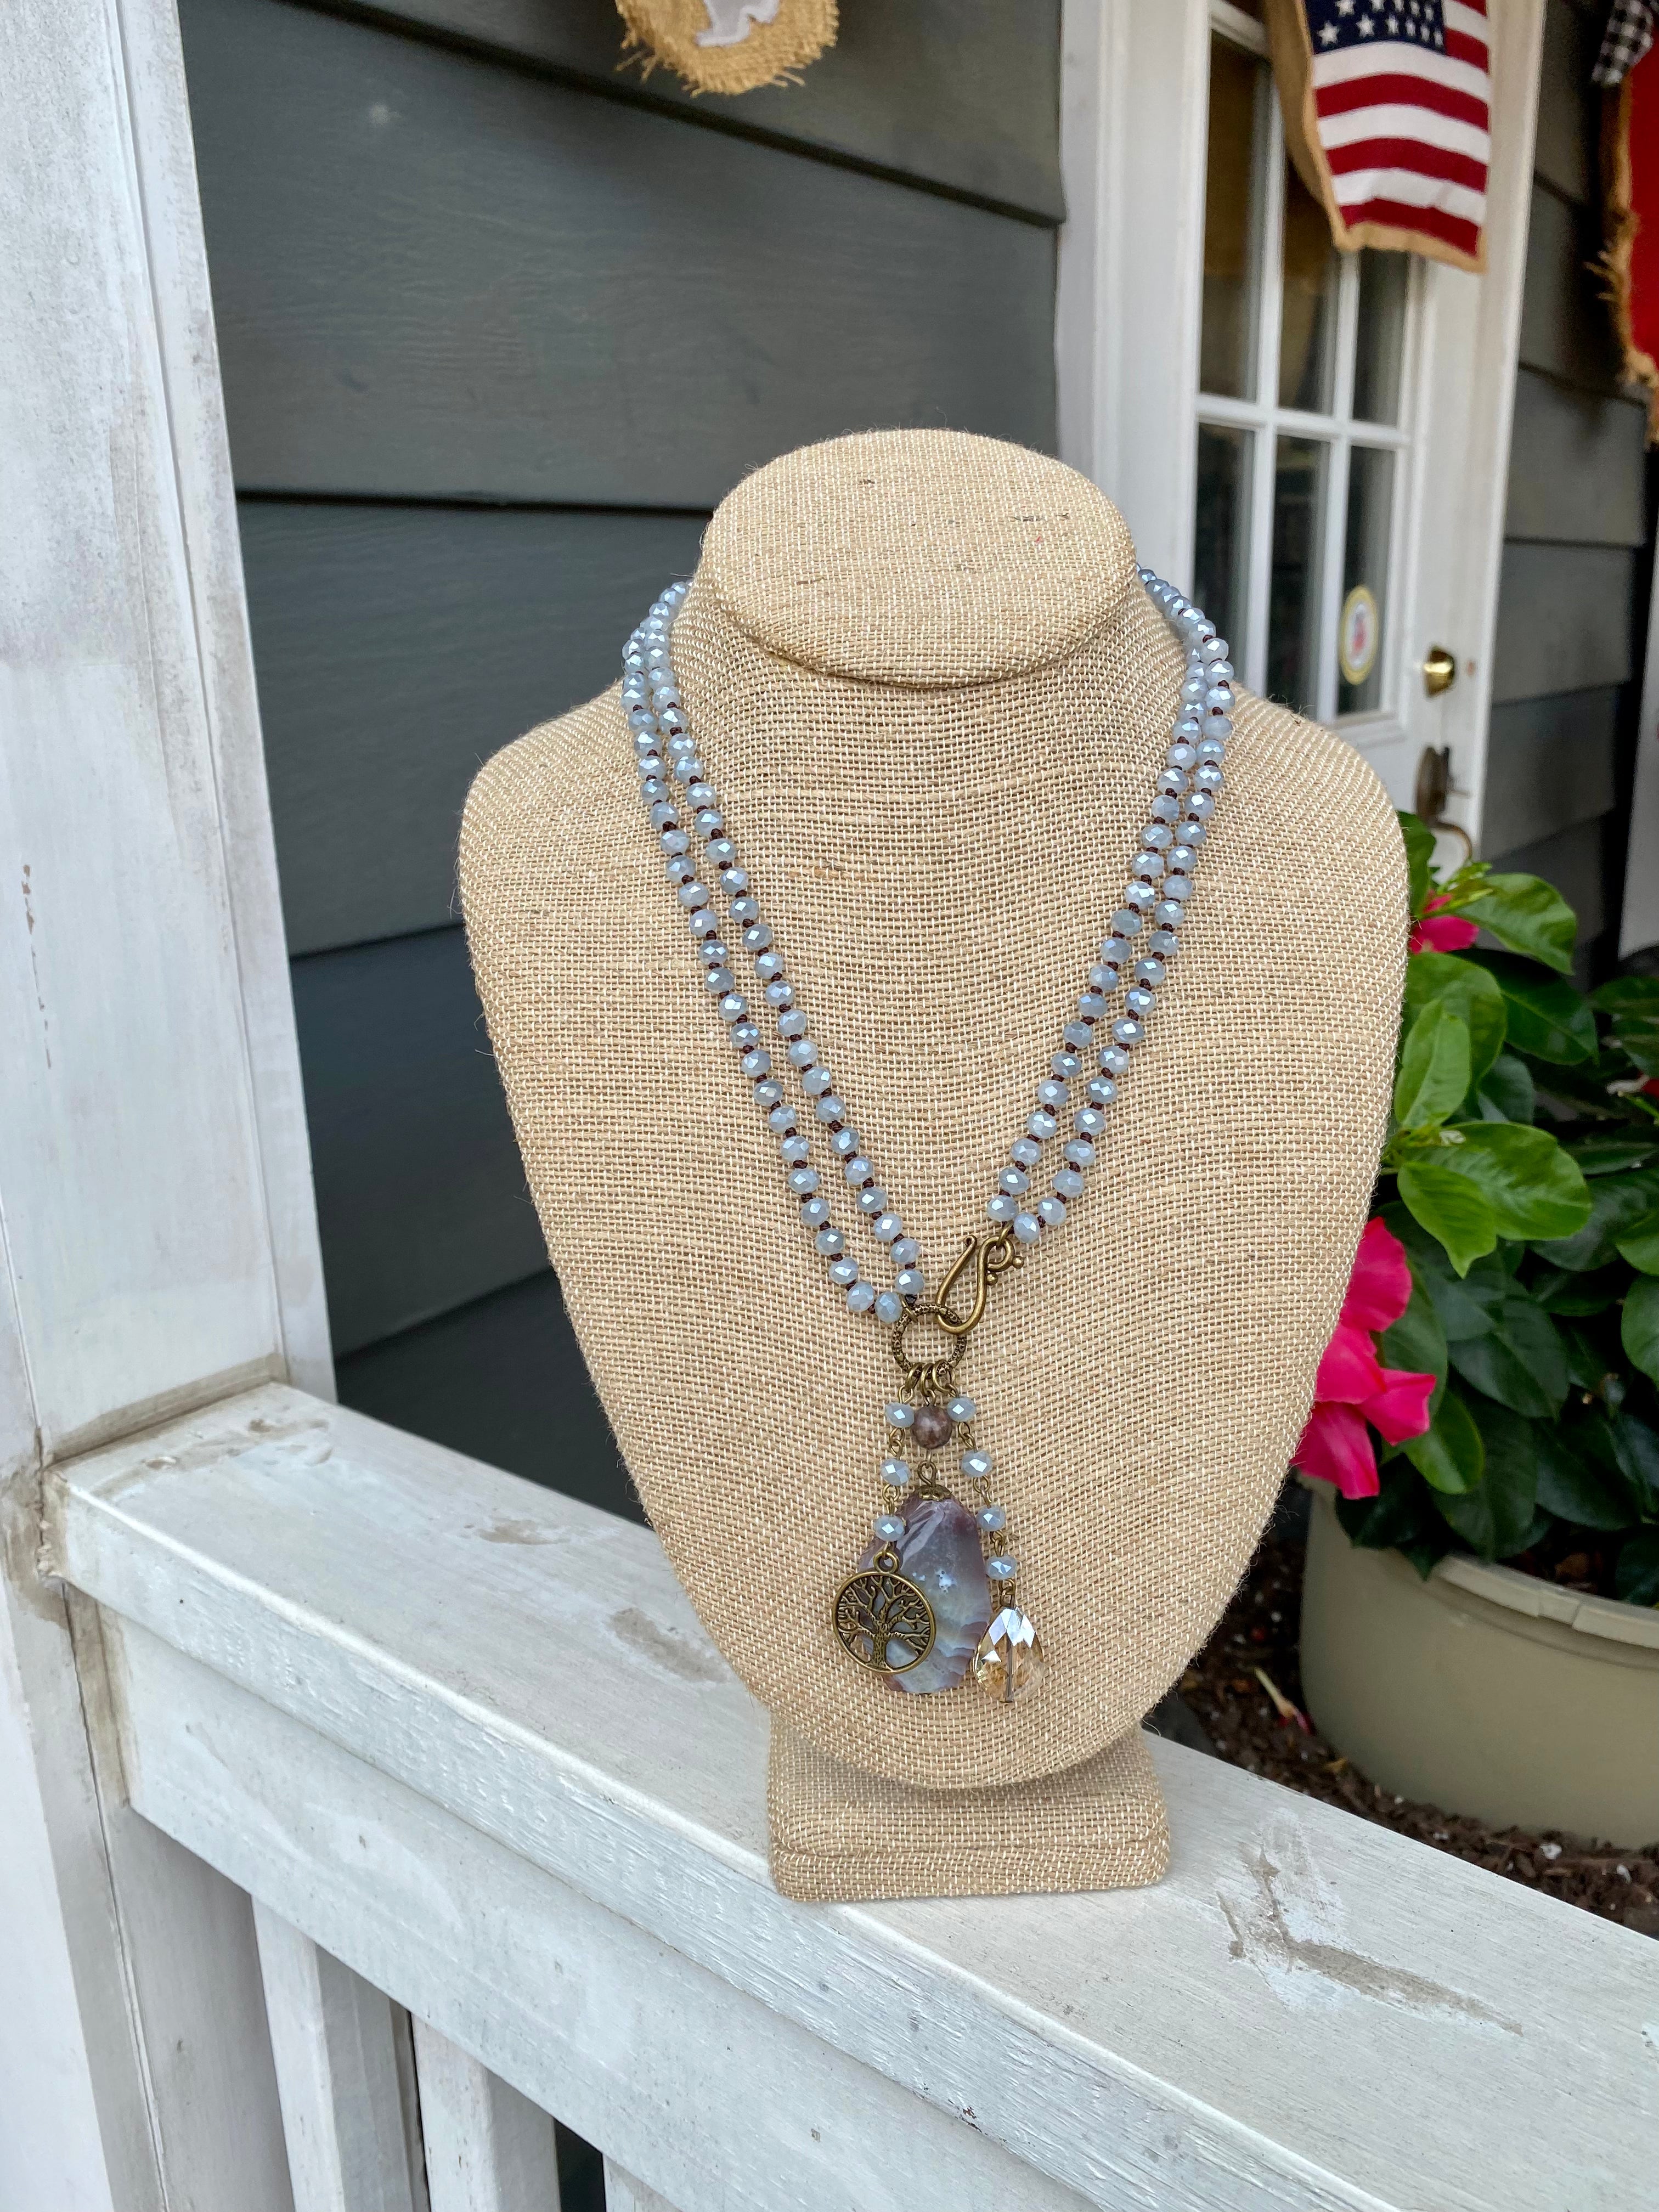 Beaded Necklace with Handmade Charms